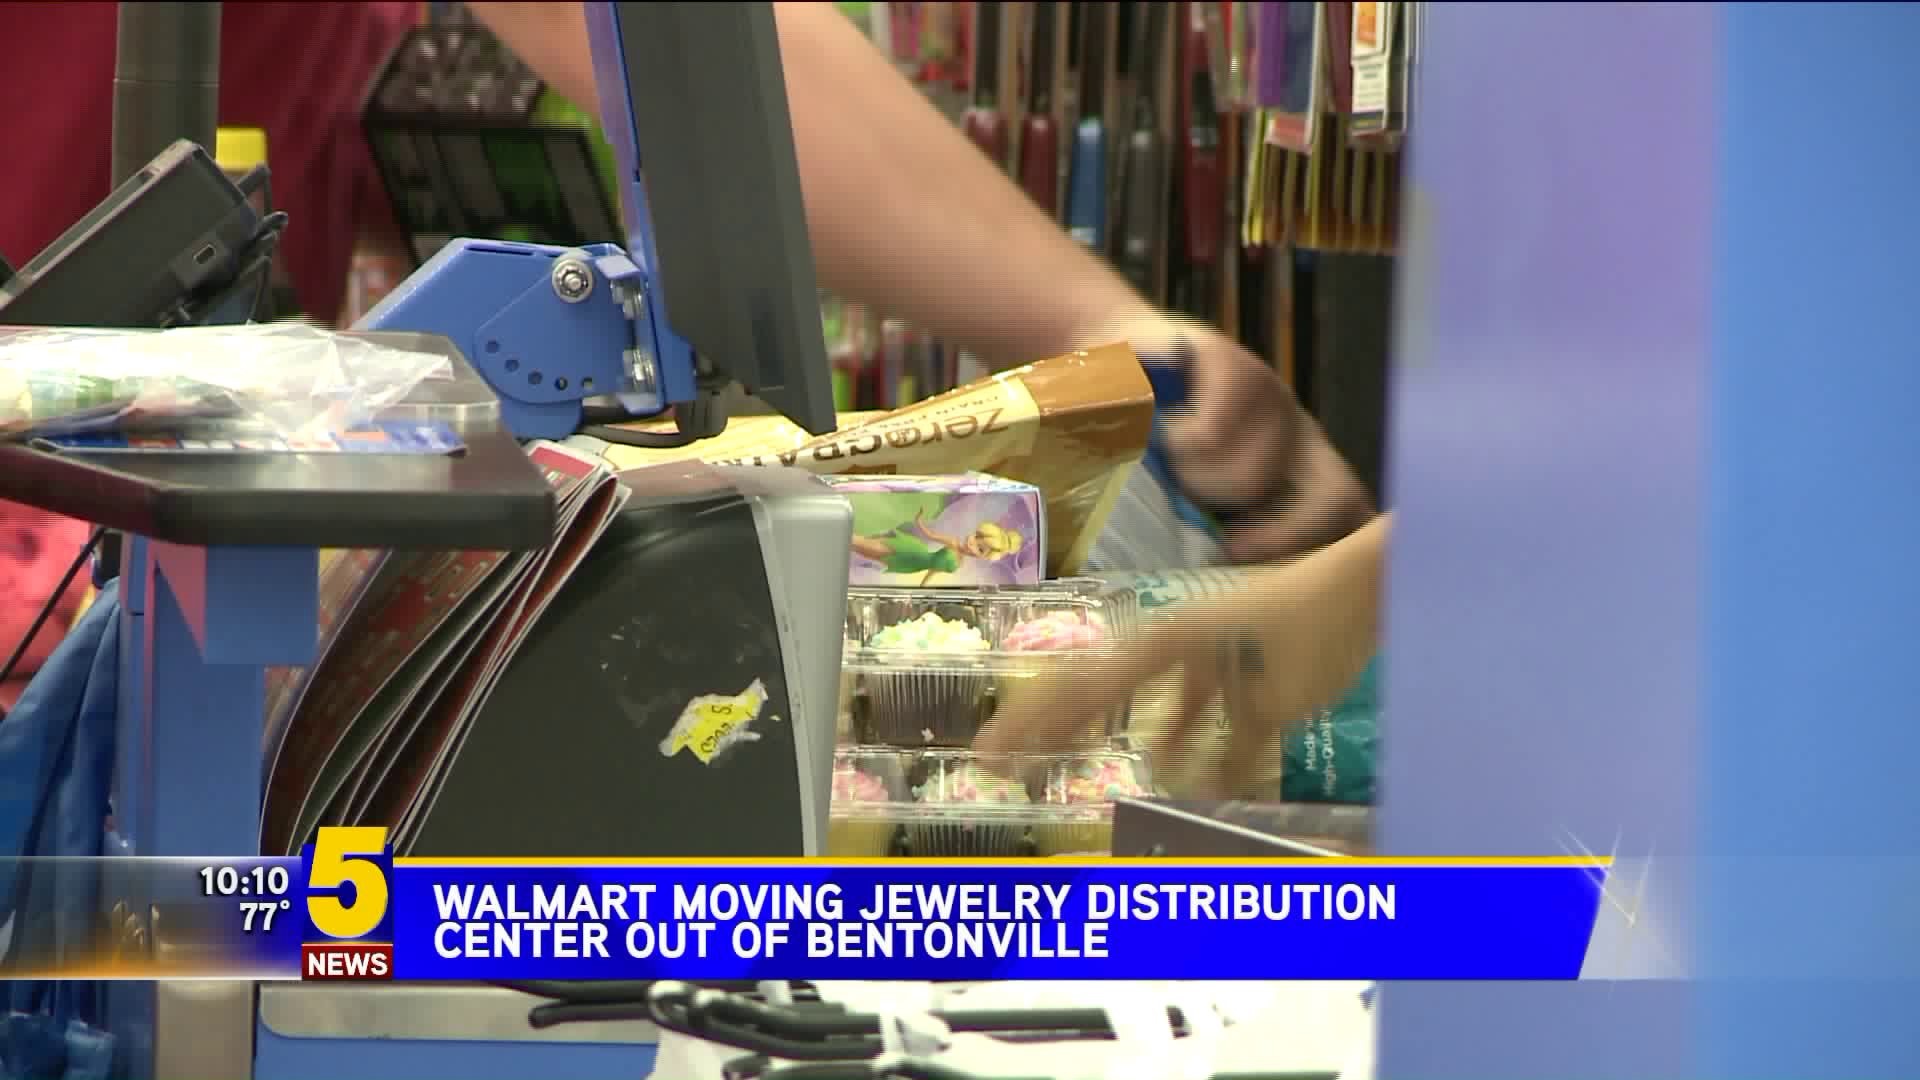 Walmart Moving Jewelry Distribution From Bentonville